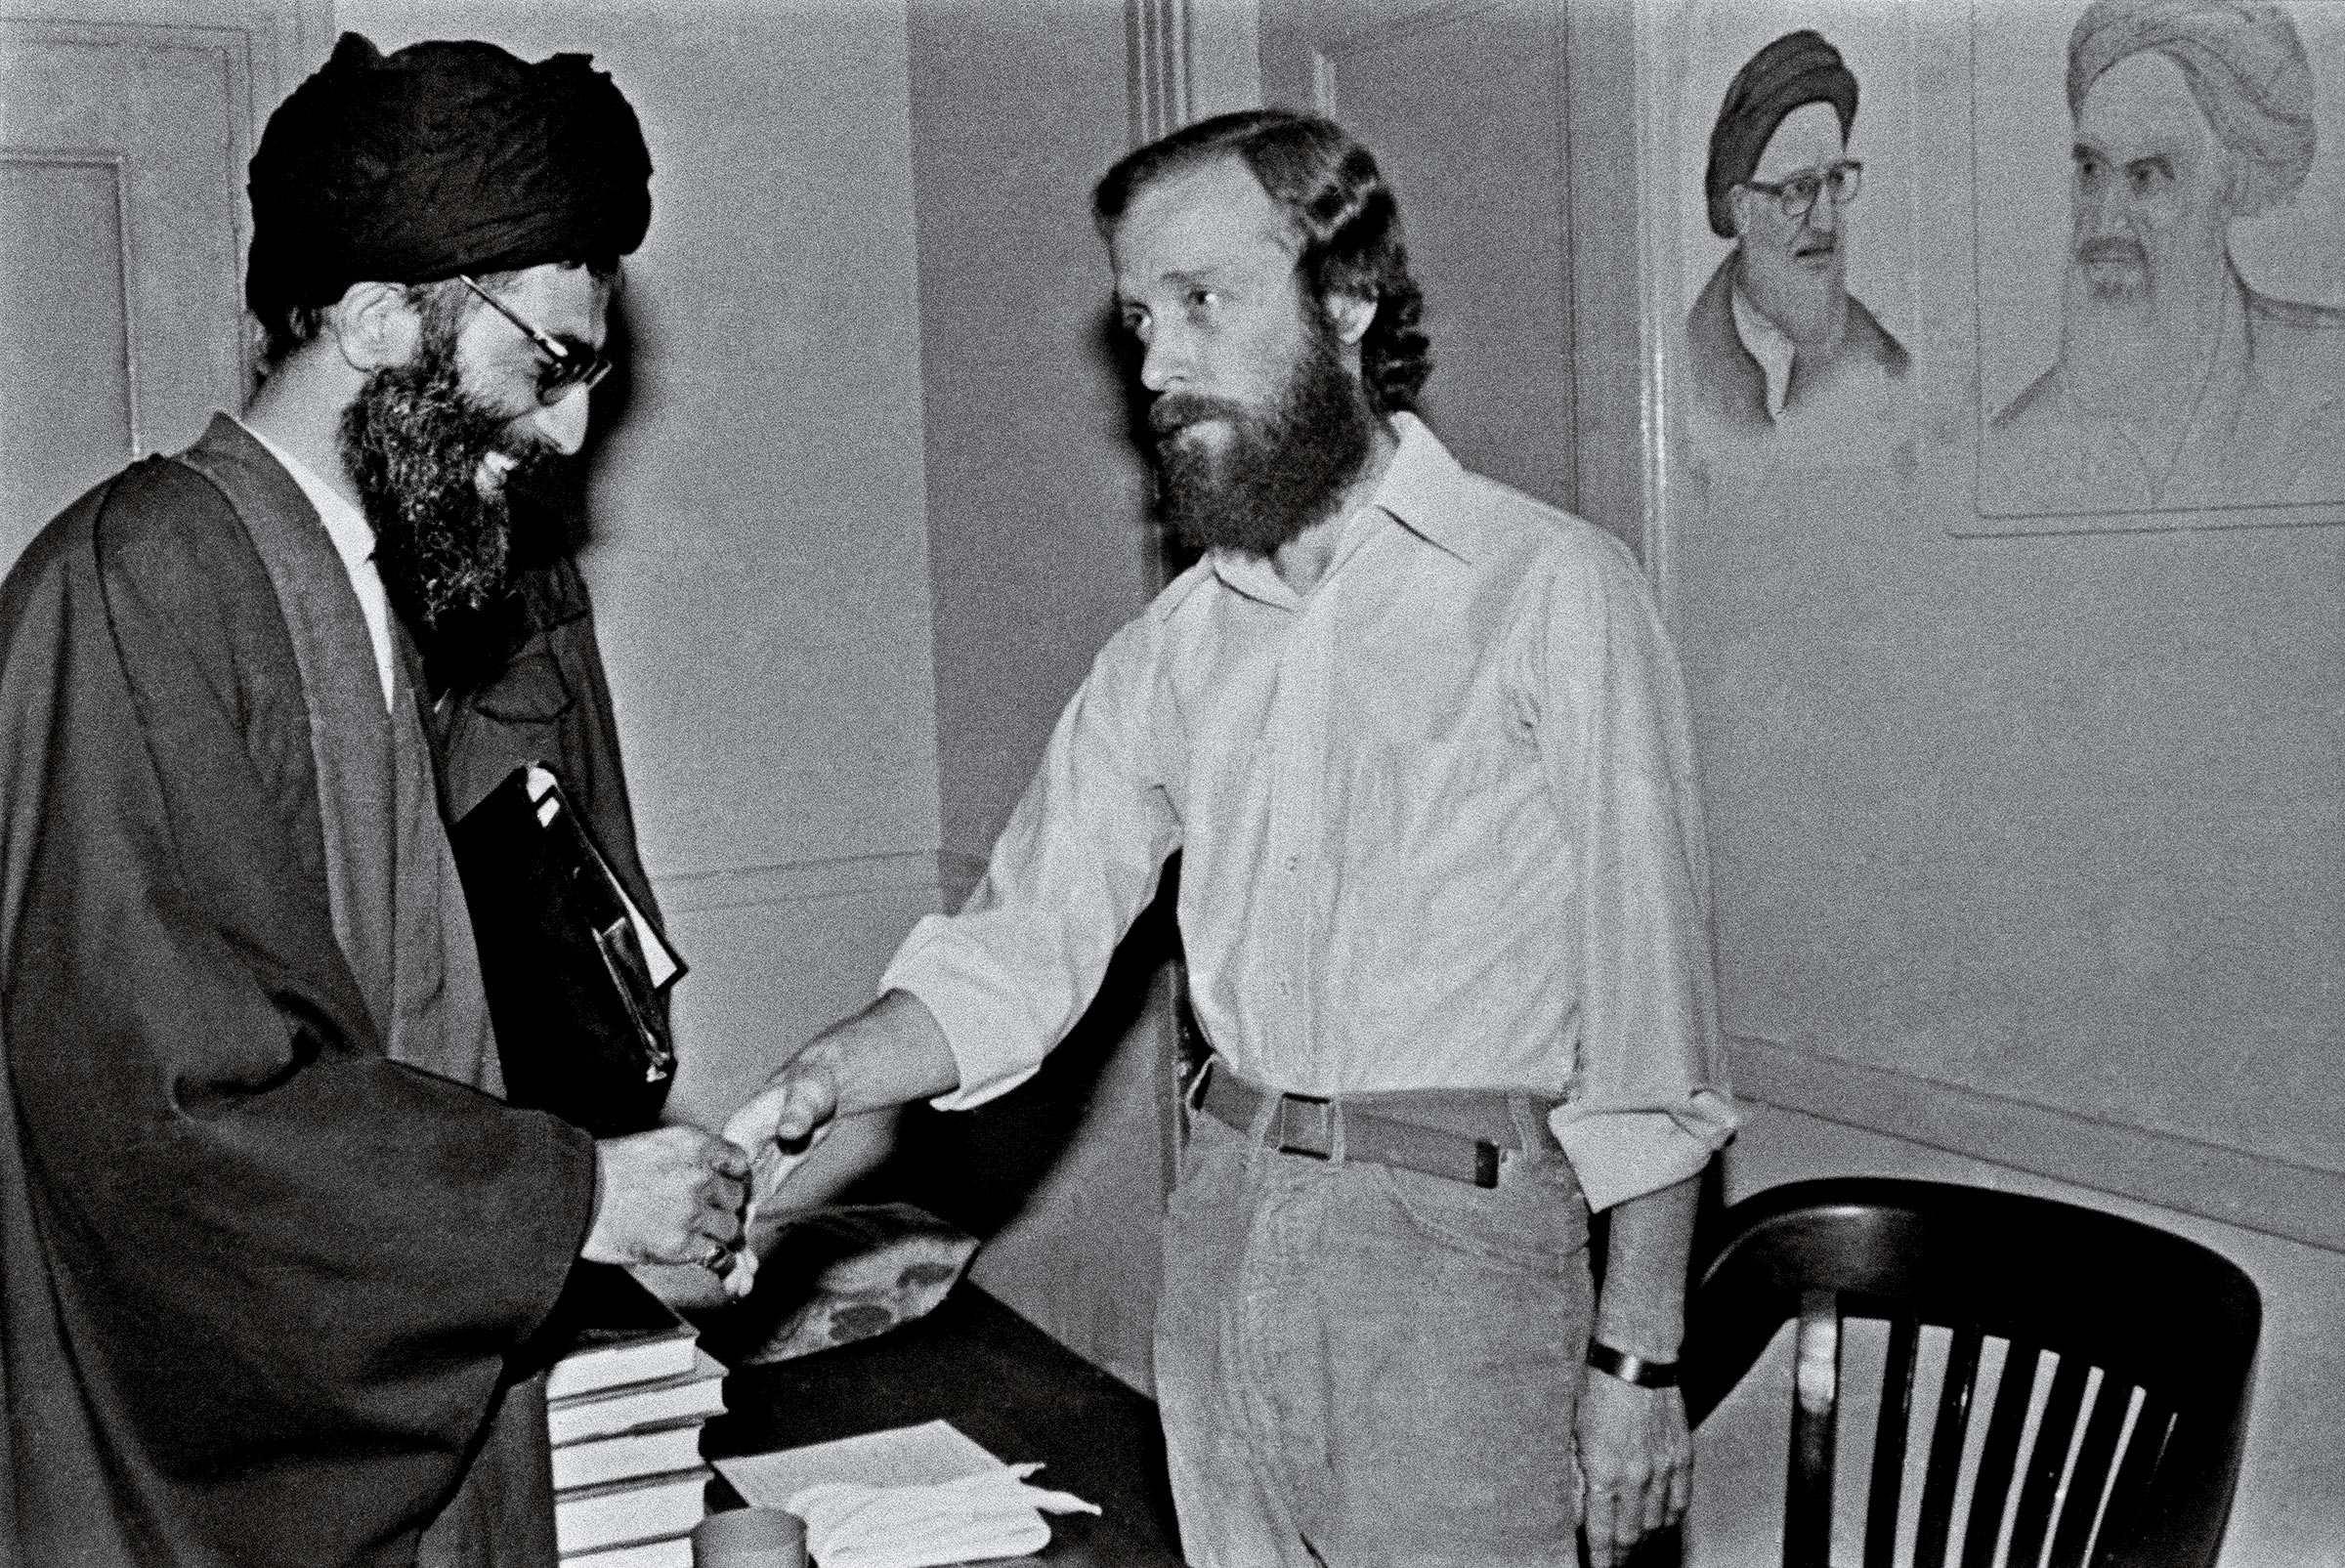 In 1980, Khamenei visited American hostages inside the captured U.S. embassy (A. Abbas—Magnum Photos)